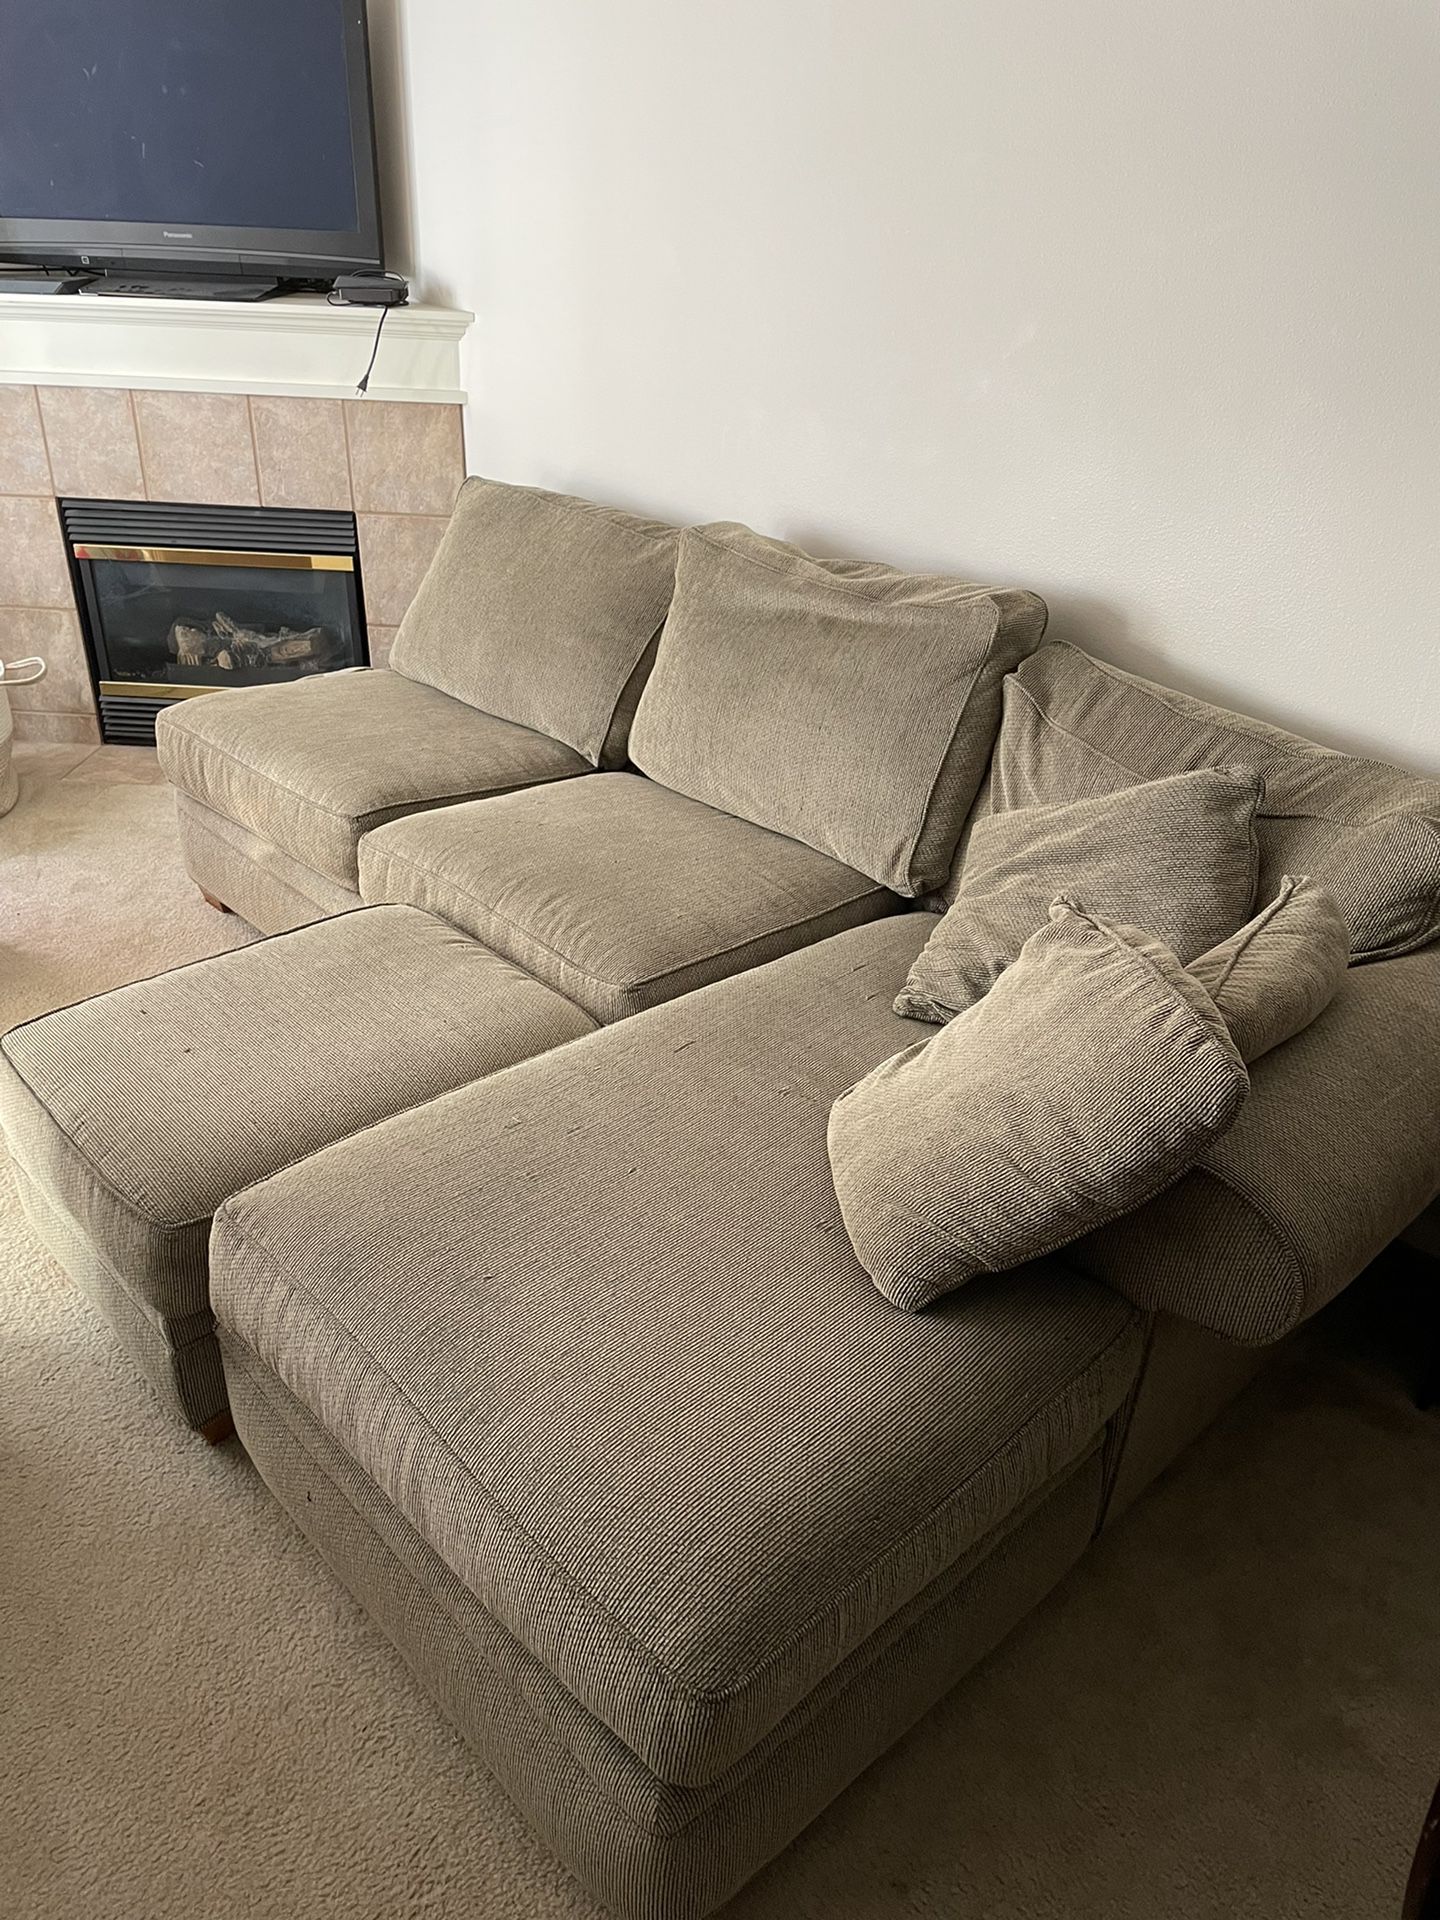 Large Couch - Clean - Comfortable - $250